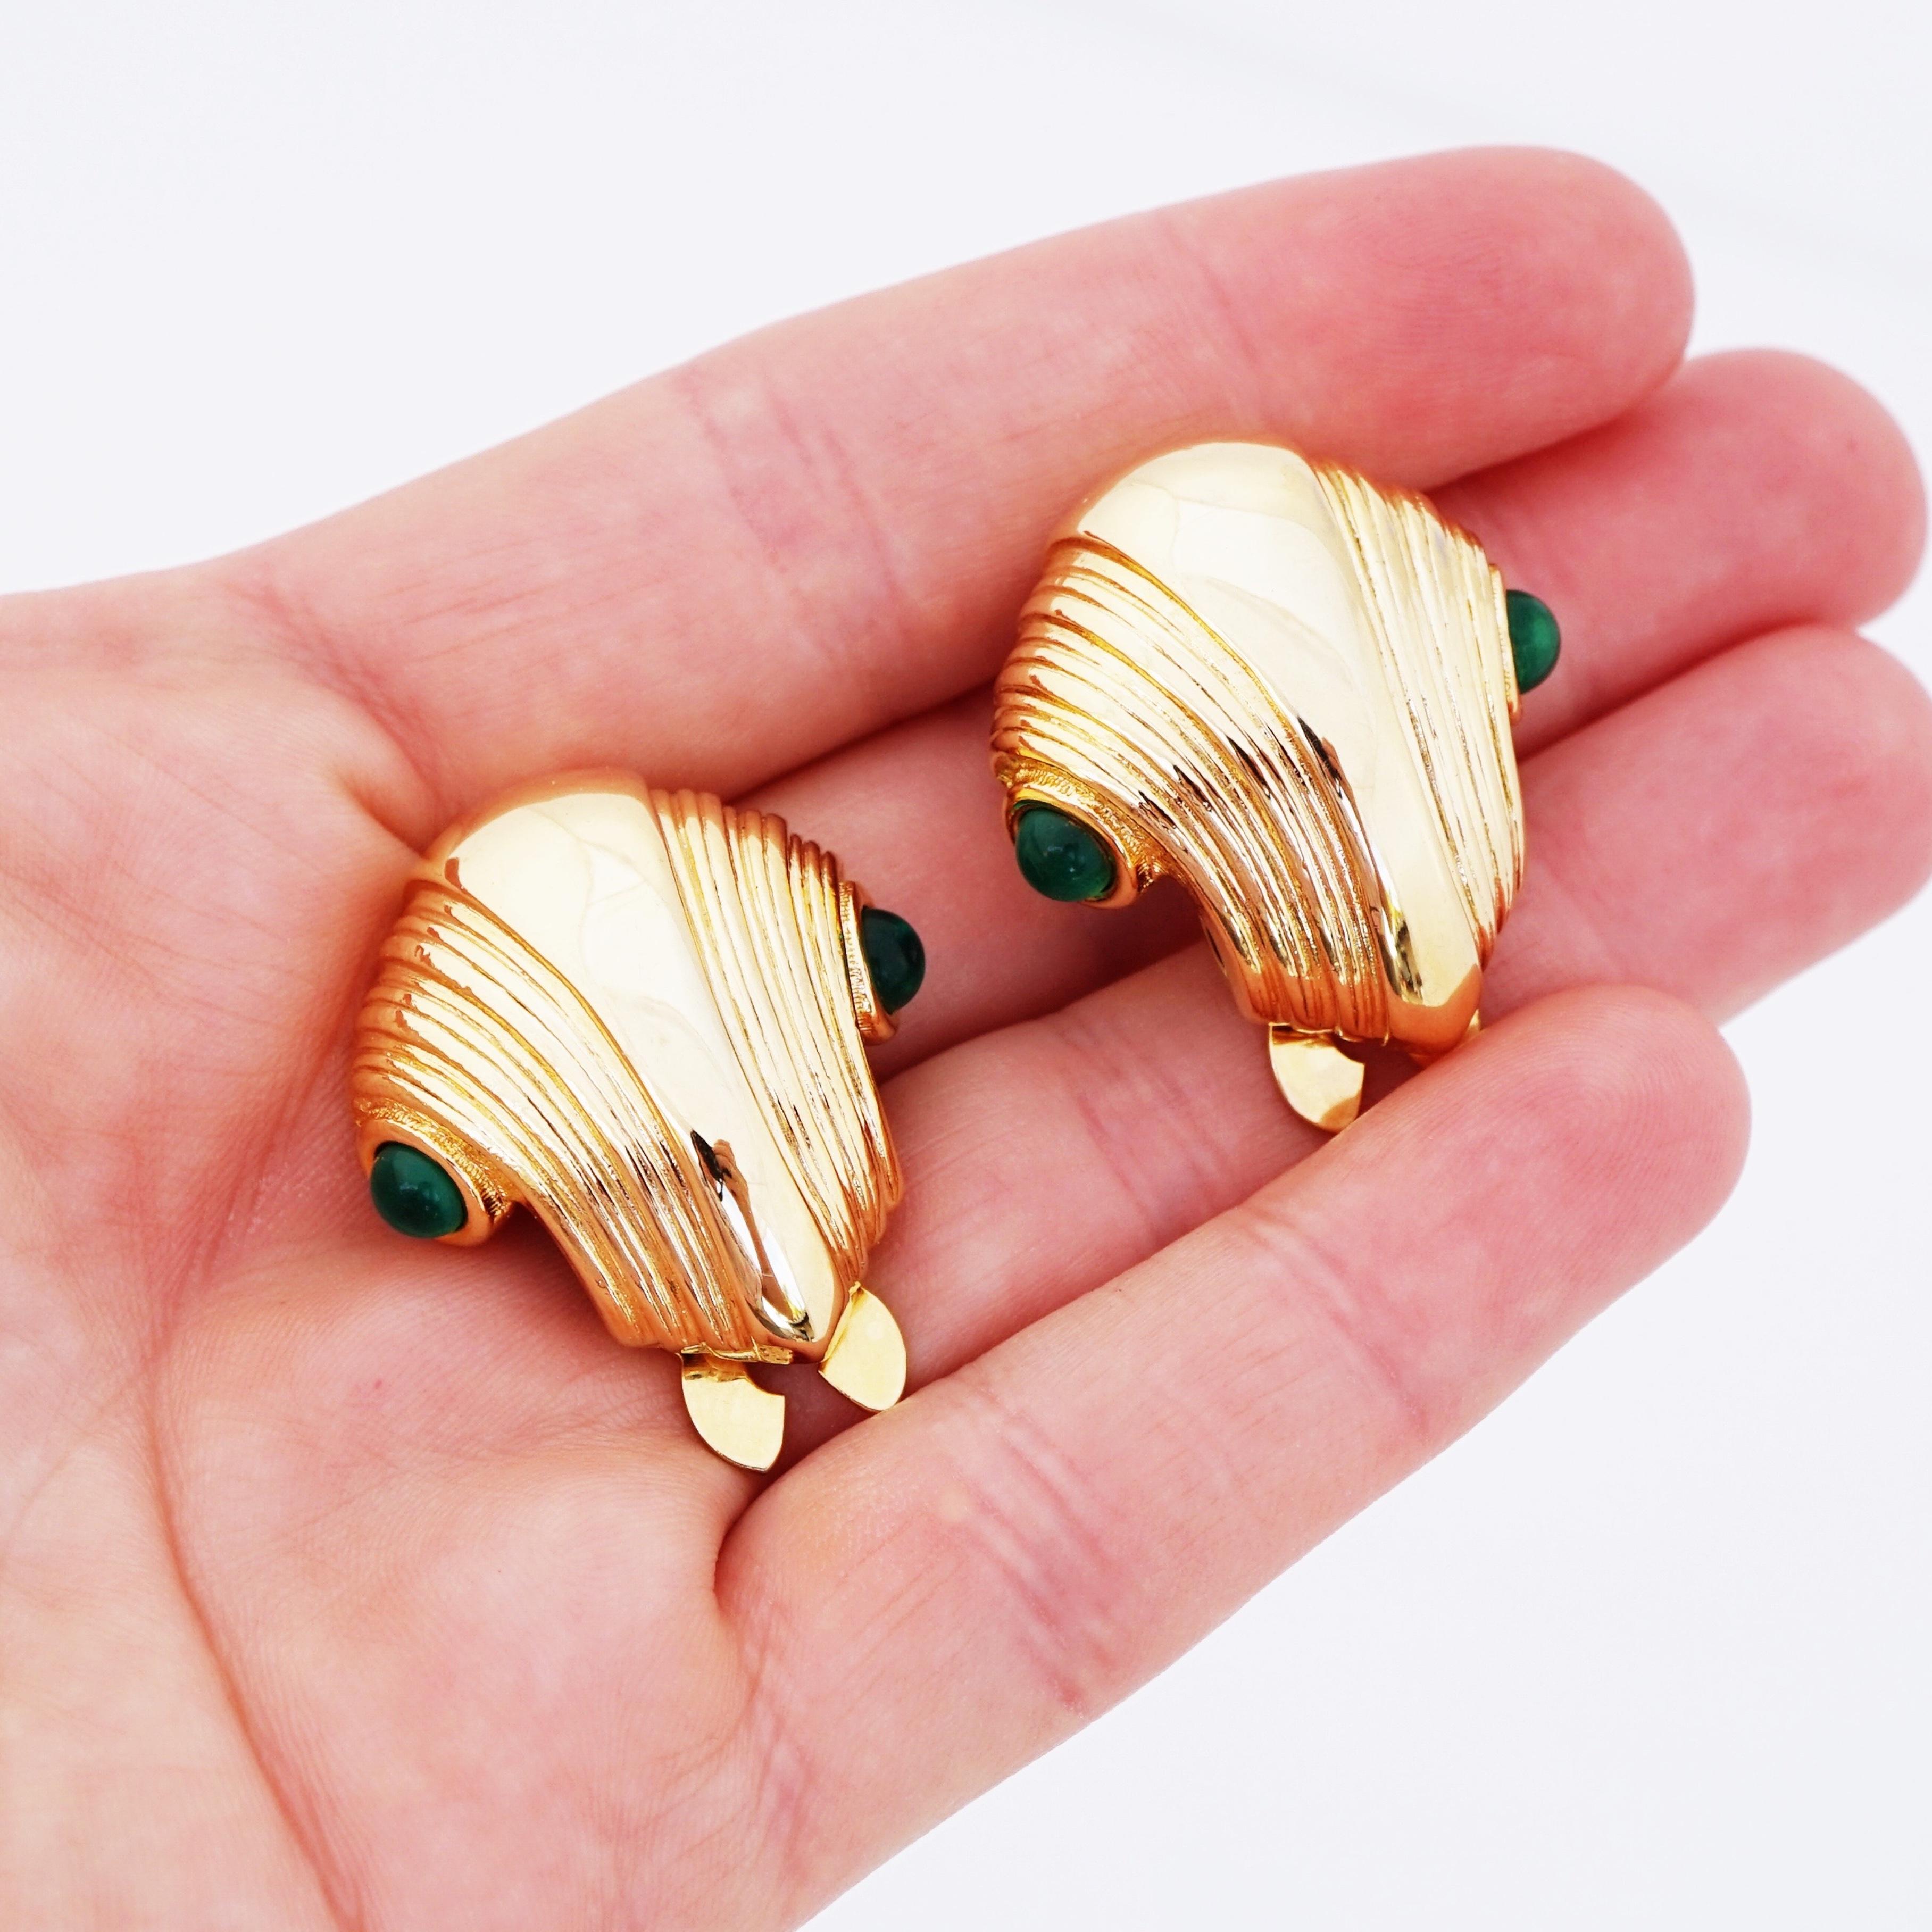 Women's Gold Statement Earrings With Emerald Glass Cabochons By Paolo Gucci, 1980s For Sale